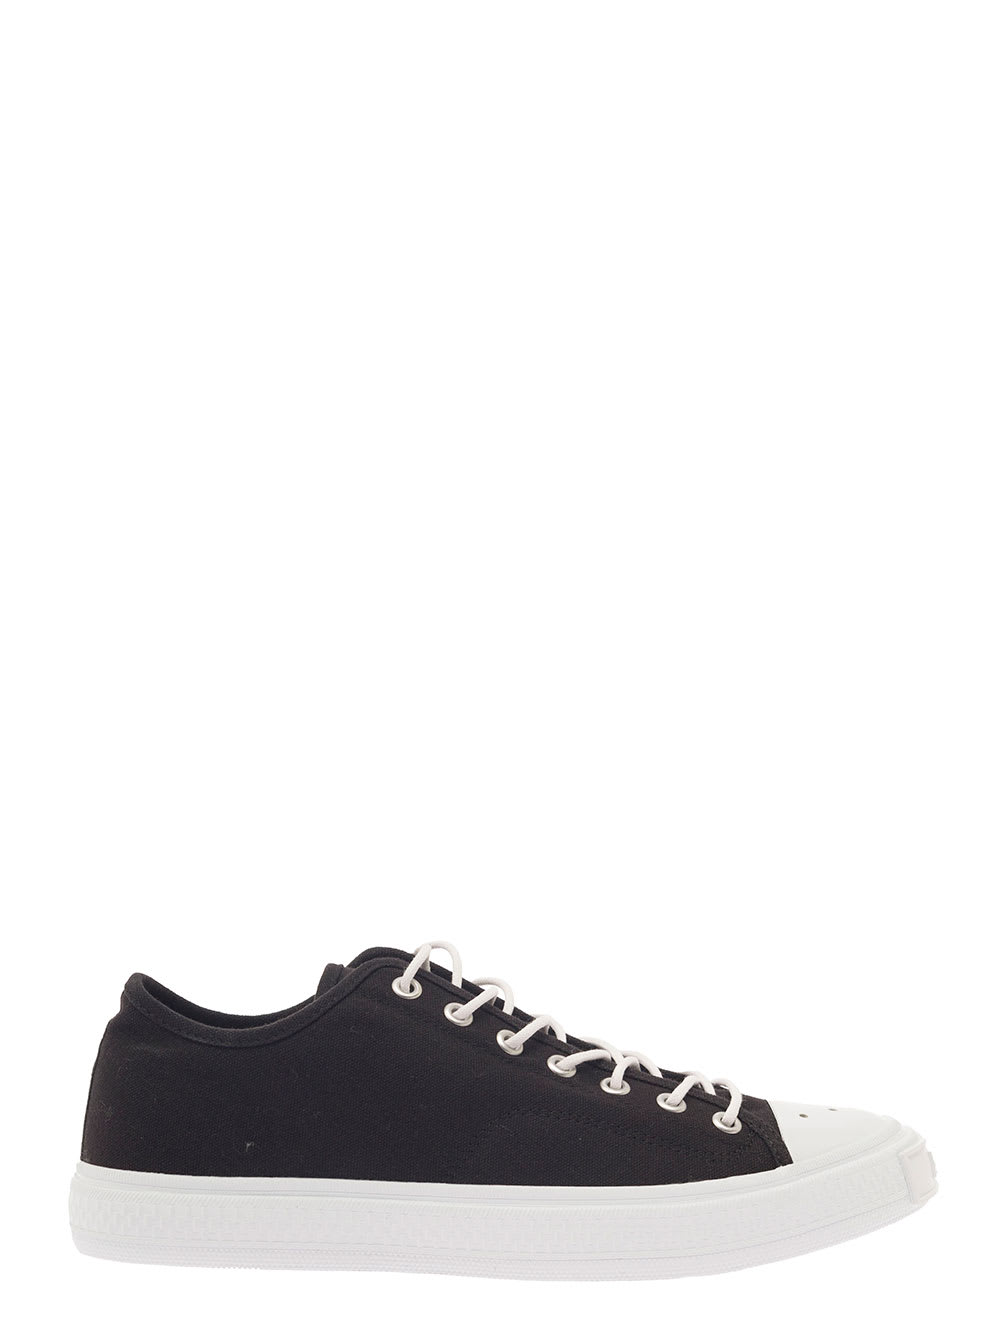 ACNE STUDIOS BLACK LOW-TOP SNEAKERS WITH WHITE LACES IN CANVAS MAN